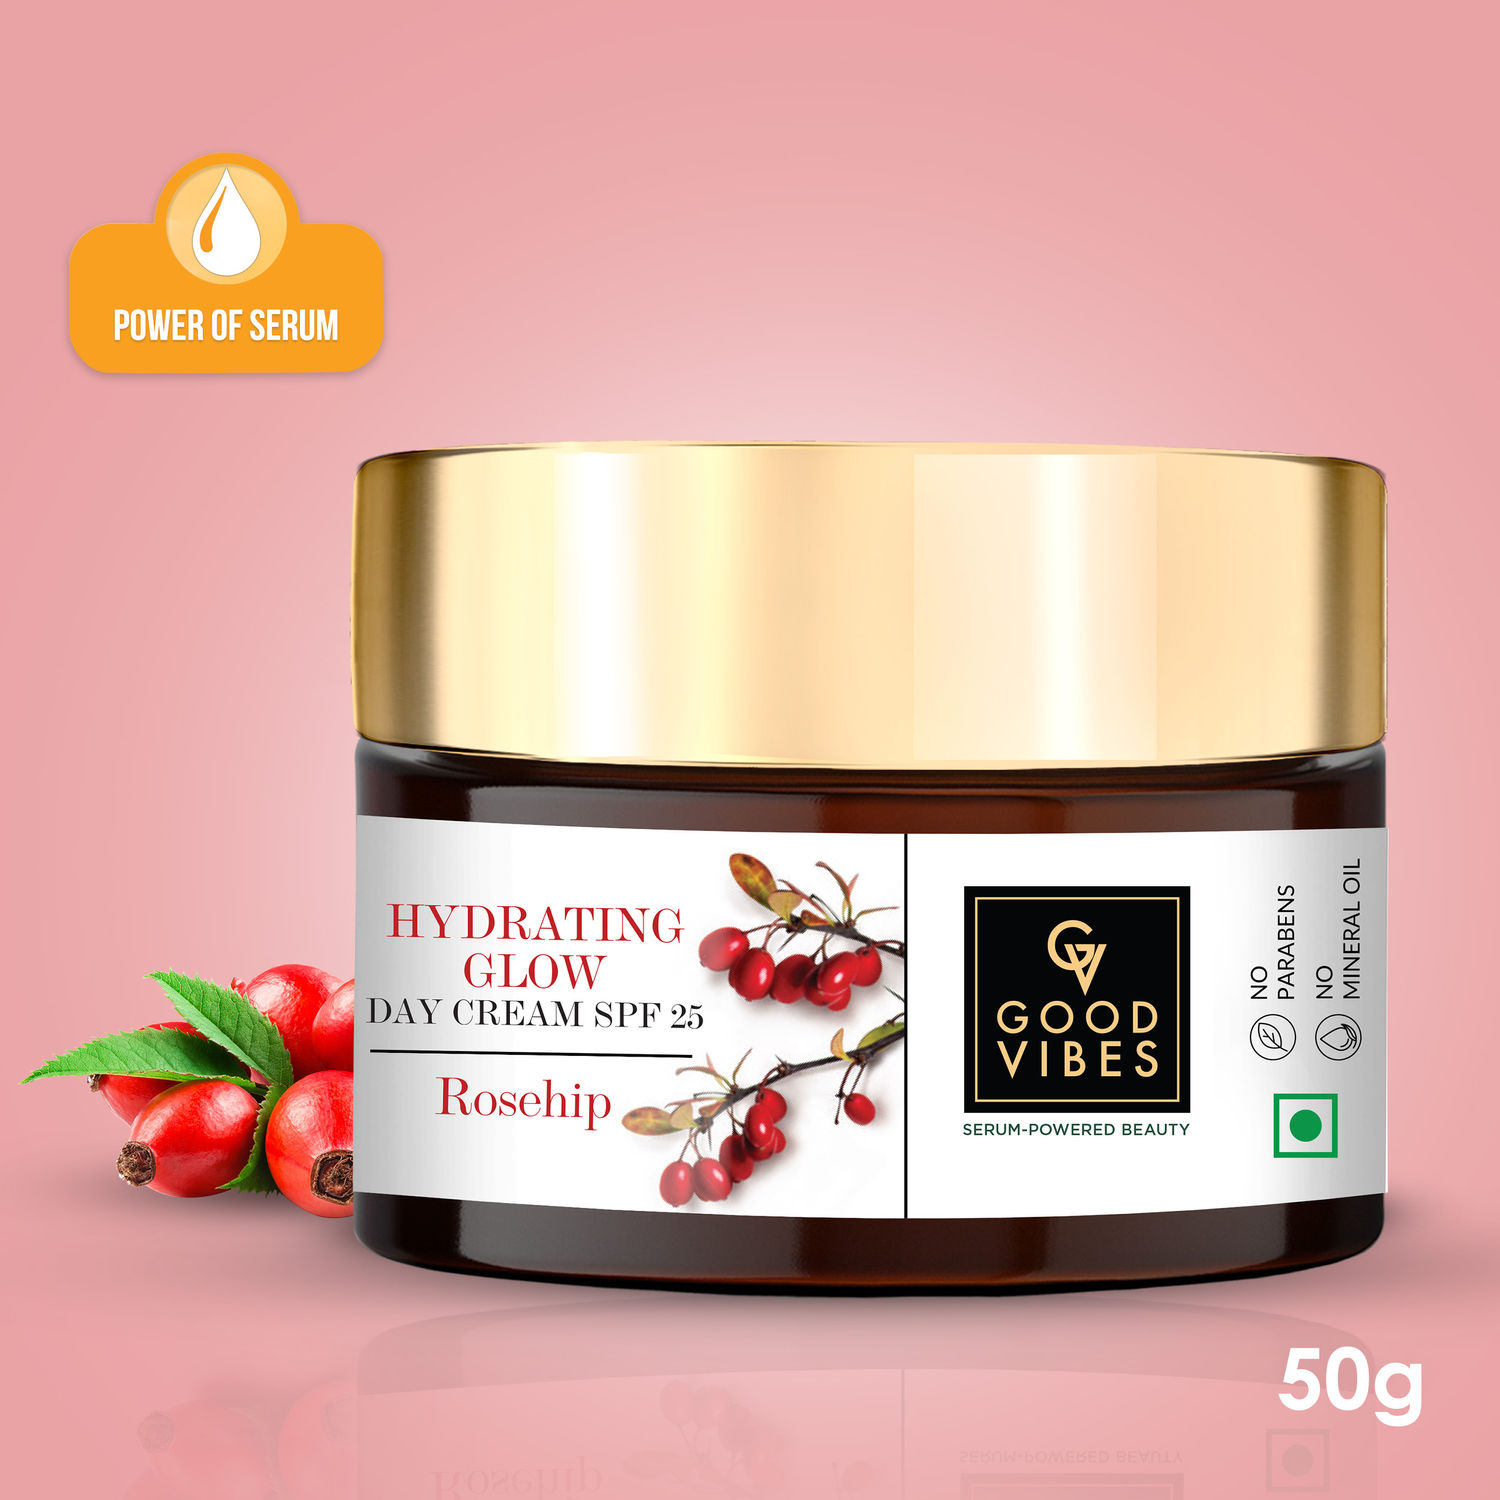 Good Vibes Hydrating Rosehip Day Cream SPF 25 with Power Of Serum | 3 - 1 Product | (50 g)